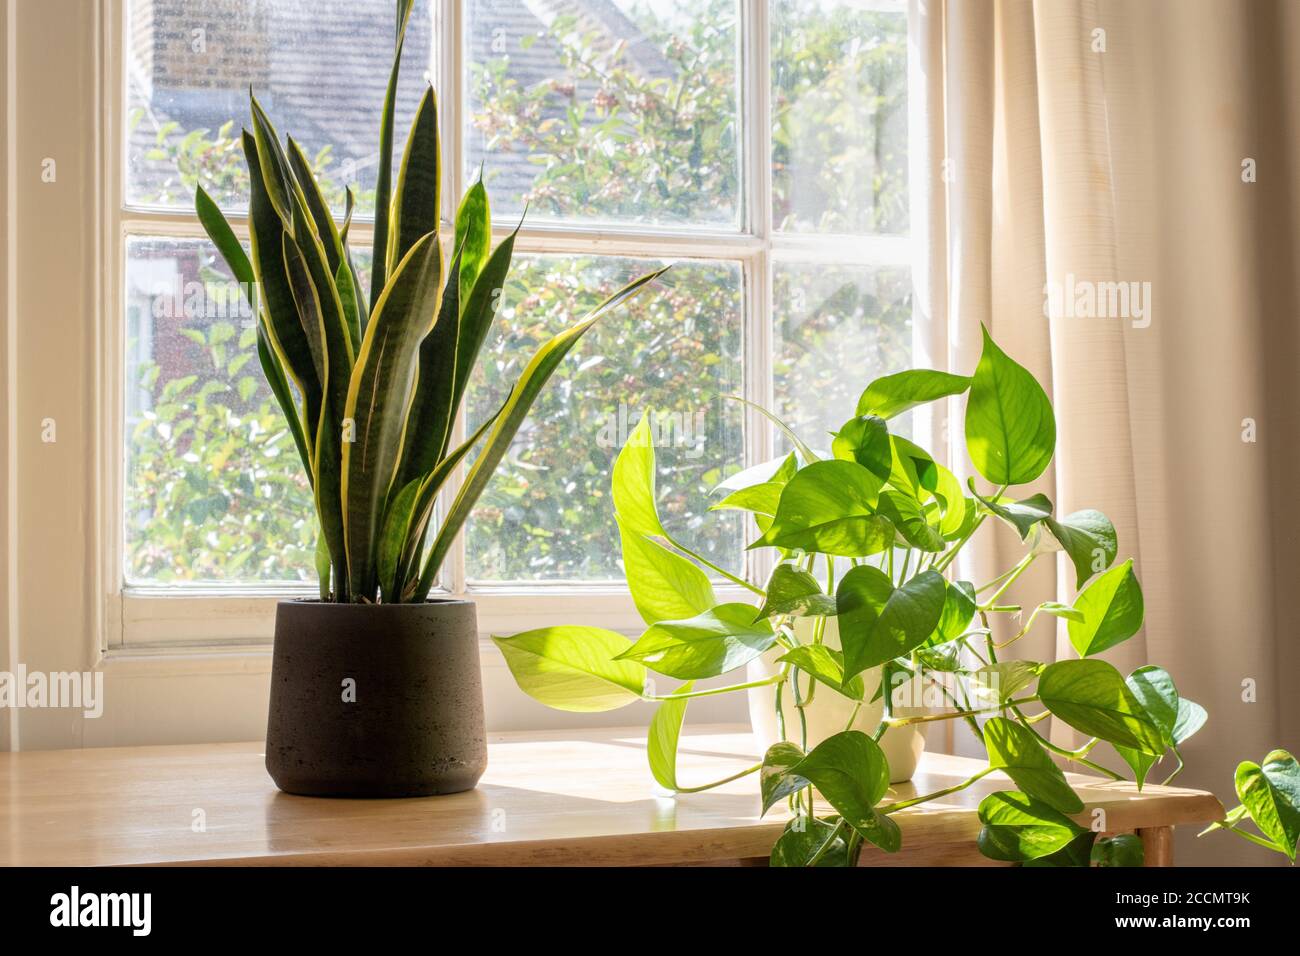 Snake plant next to a window in a beautifully designed home or apartment interior. Stock Photo